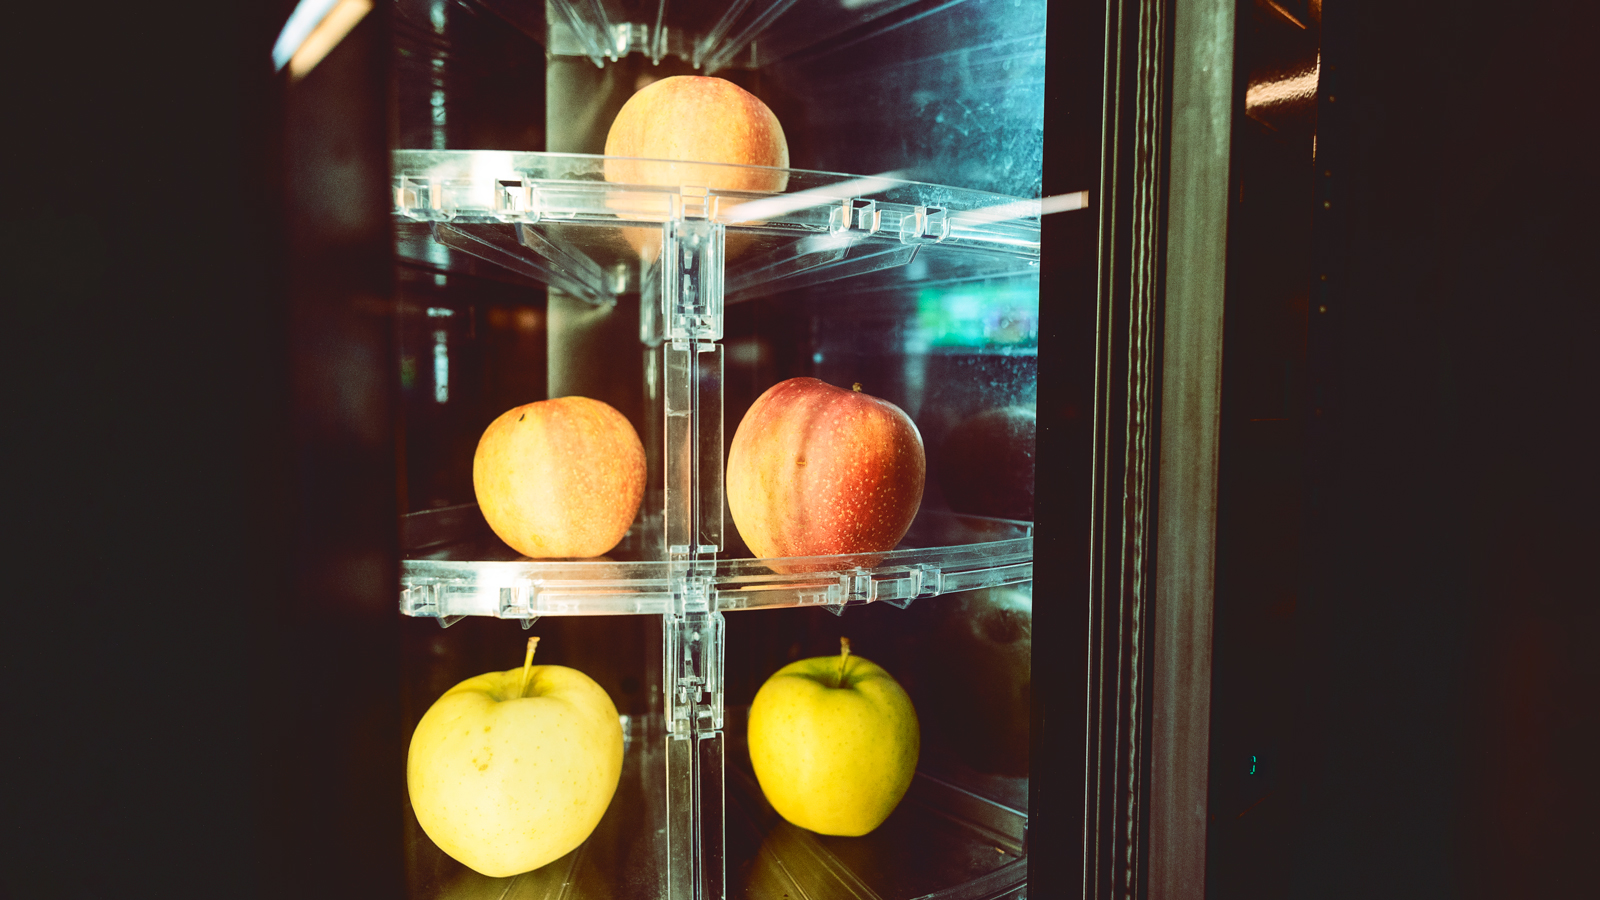 Apples stocked in the vending machine in front of Mann Library